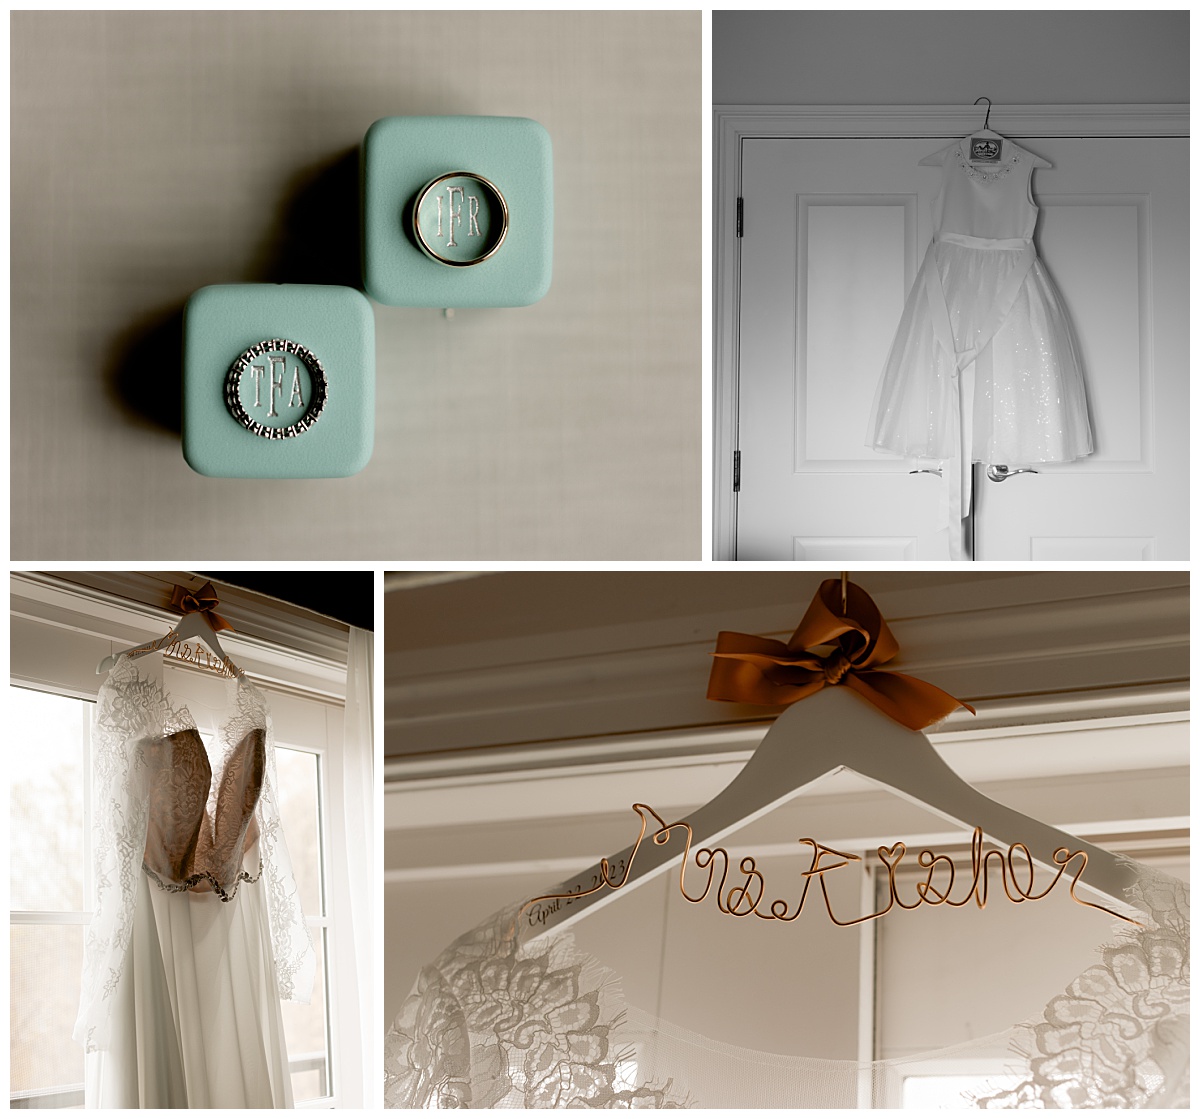 rings sit on ring boxes and dresses hang on windows by New York wedding photographer